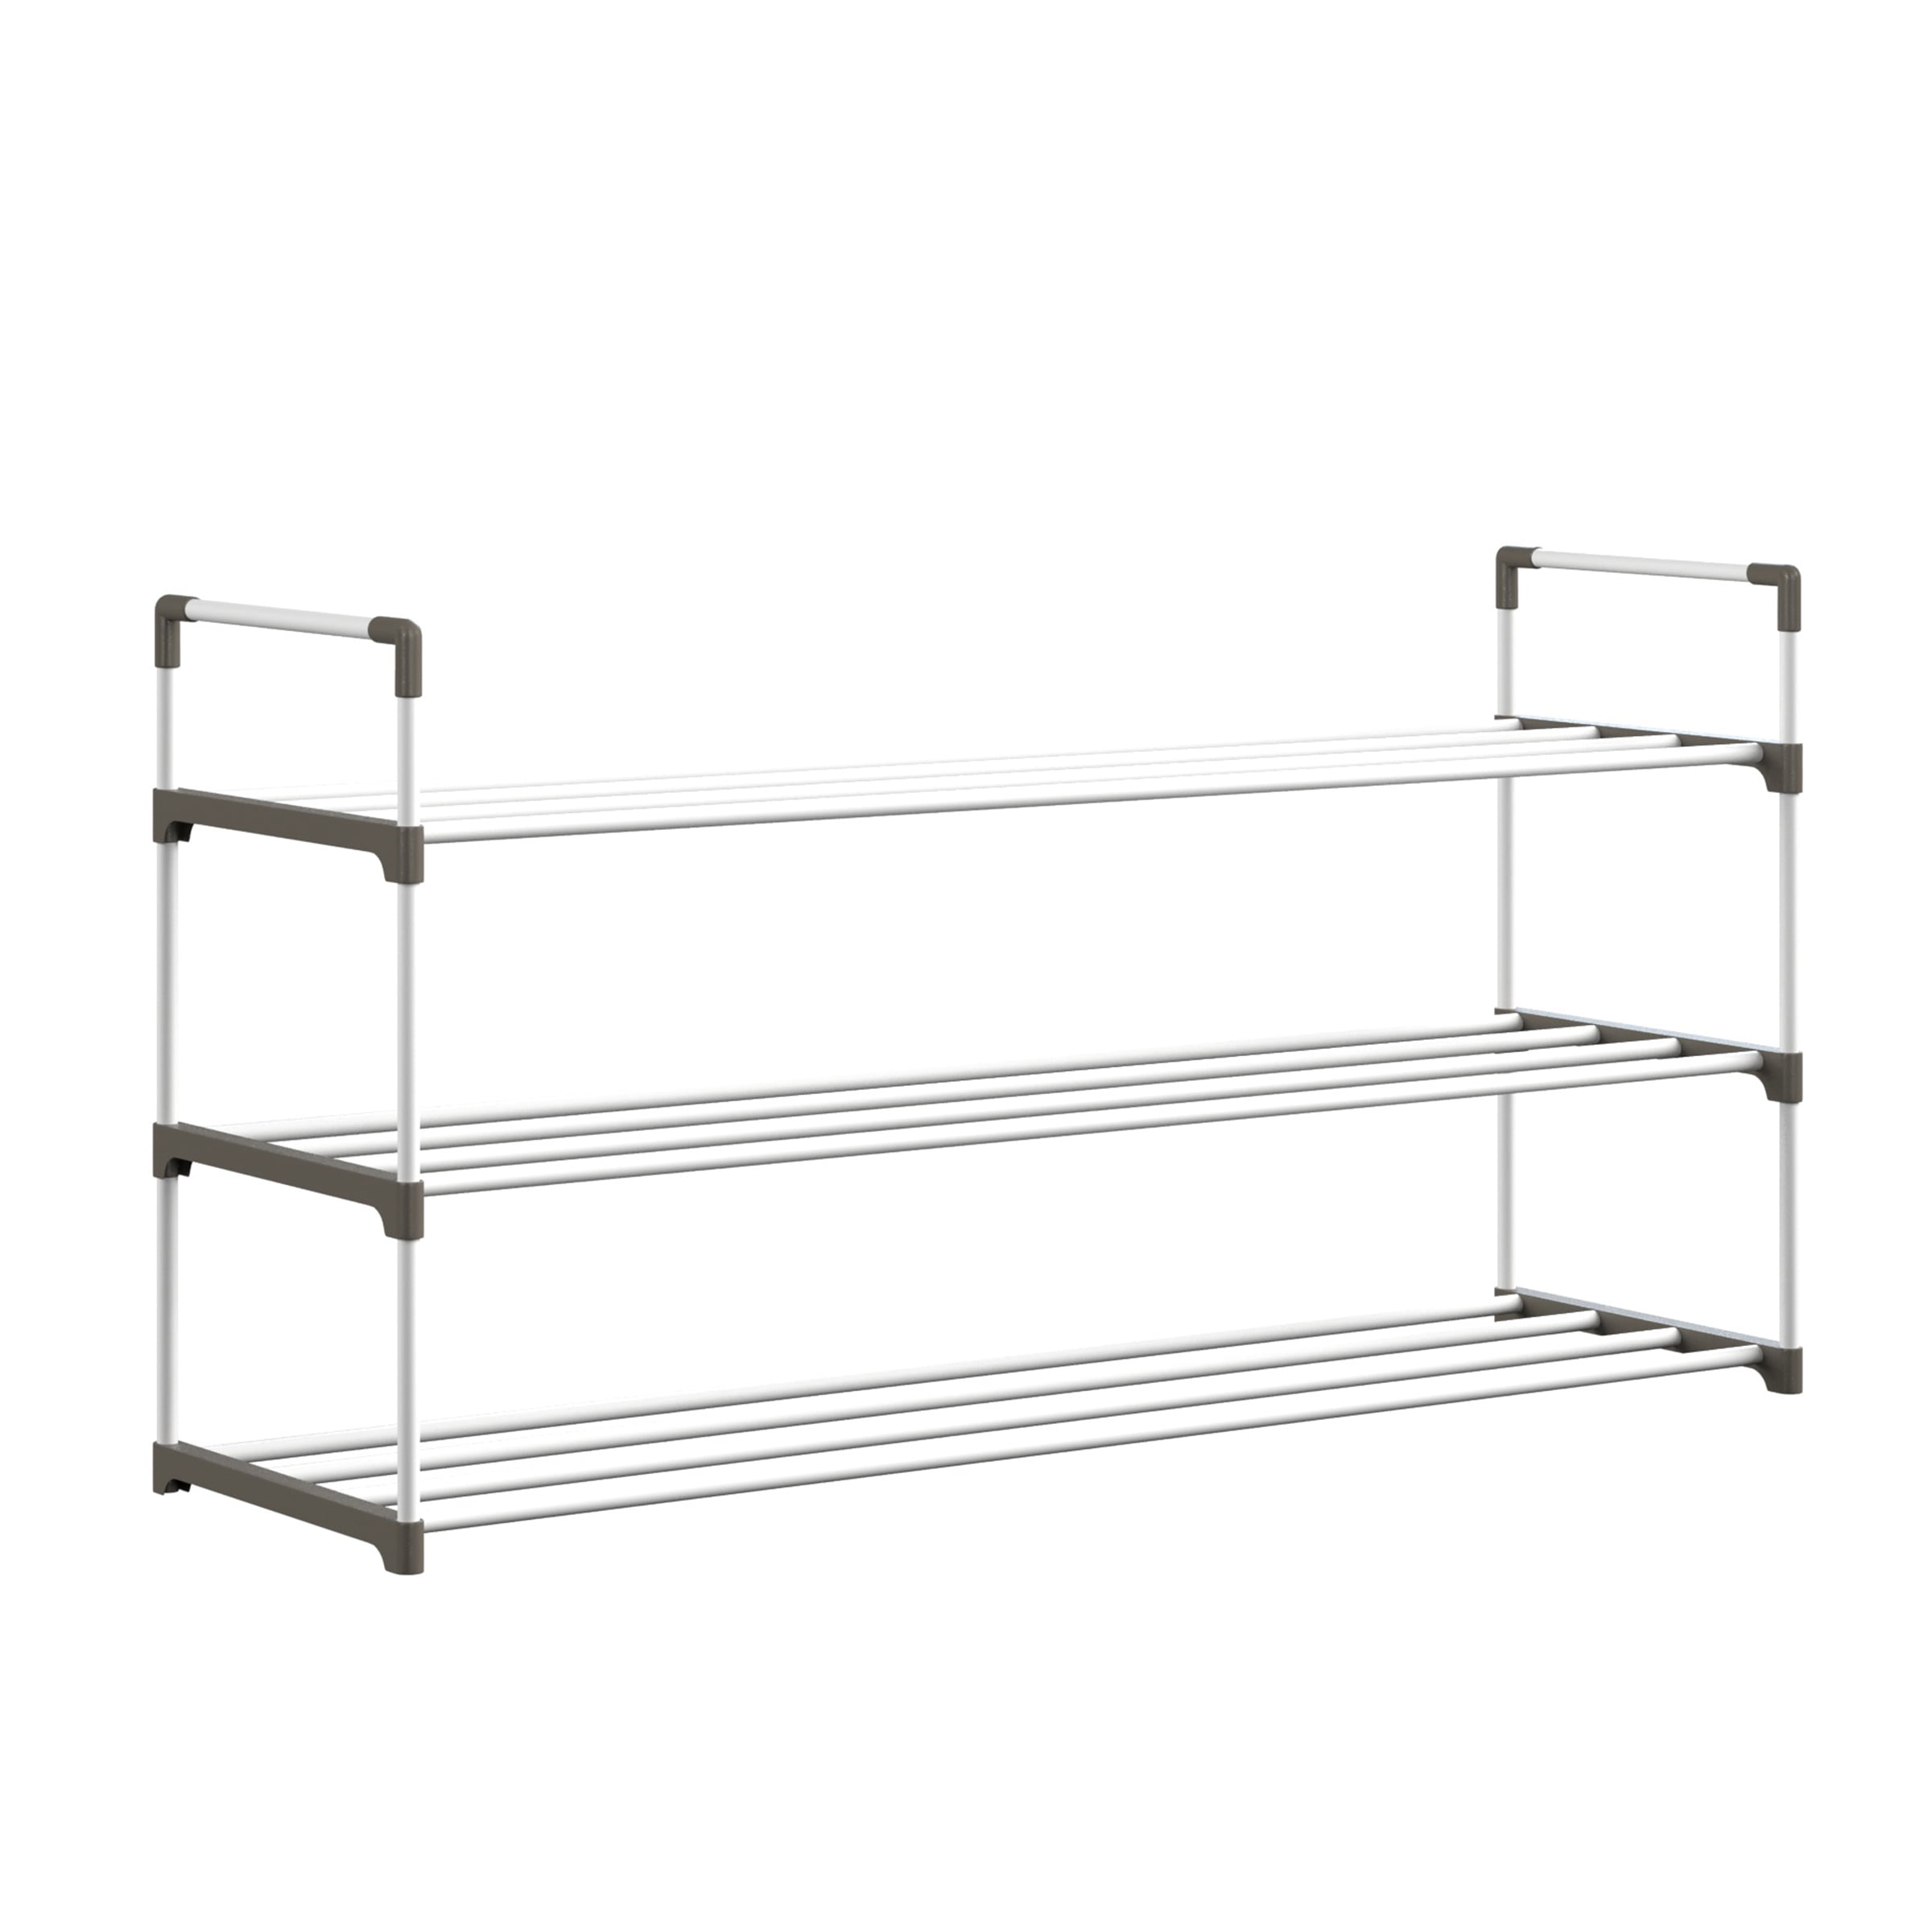 HOUSE AGAIN 4 Tier Long Shoe Rack for Closet, Shoe Shelf 24-Pairs Wide  Non-woven Cloth Max Weight 100LBS, Storage Organize for Floor, Bedroom,  Entryways, Garages, Dorm, Apartments, Black - Coupon Codes, Promo